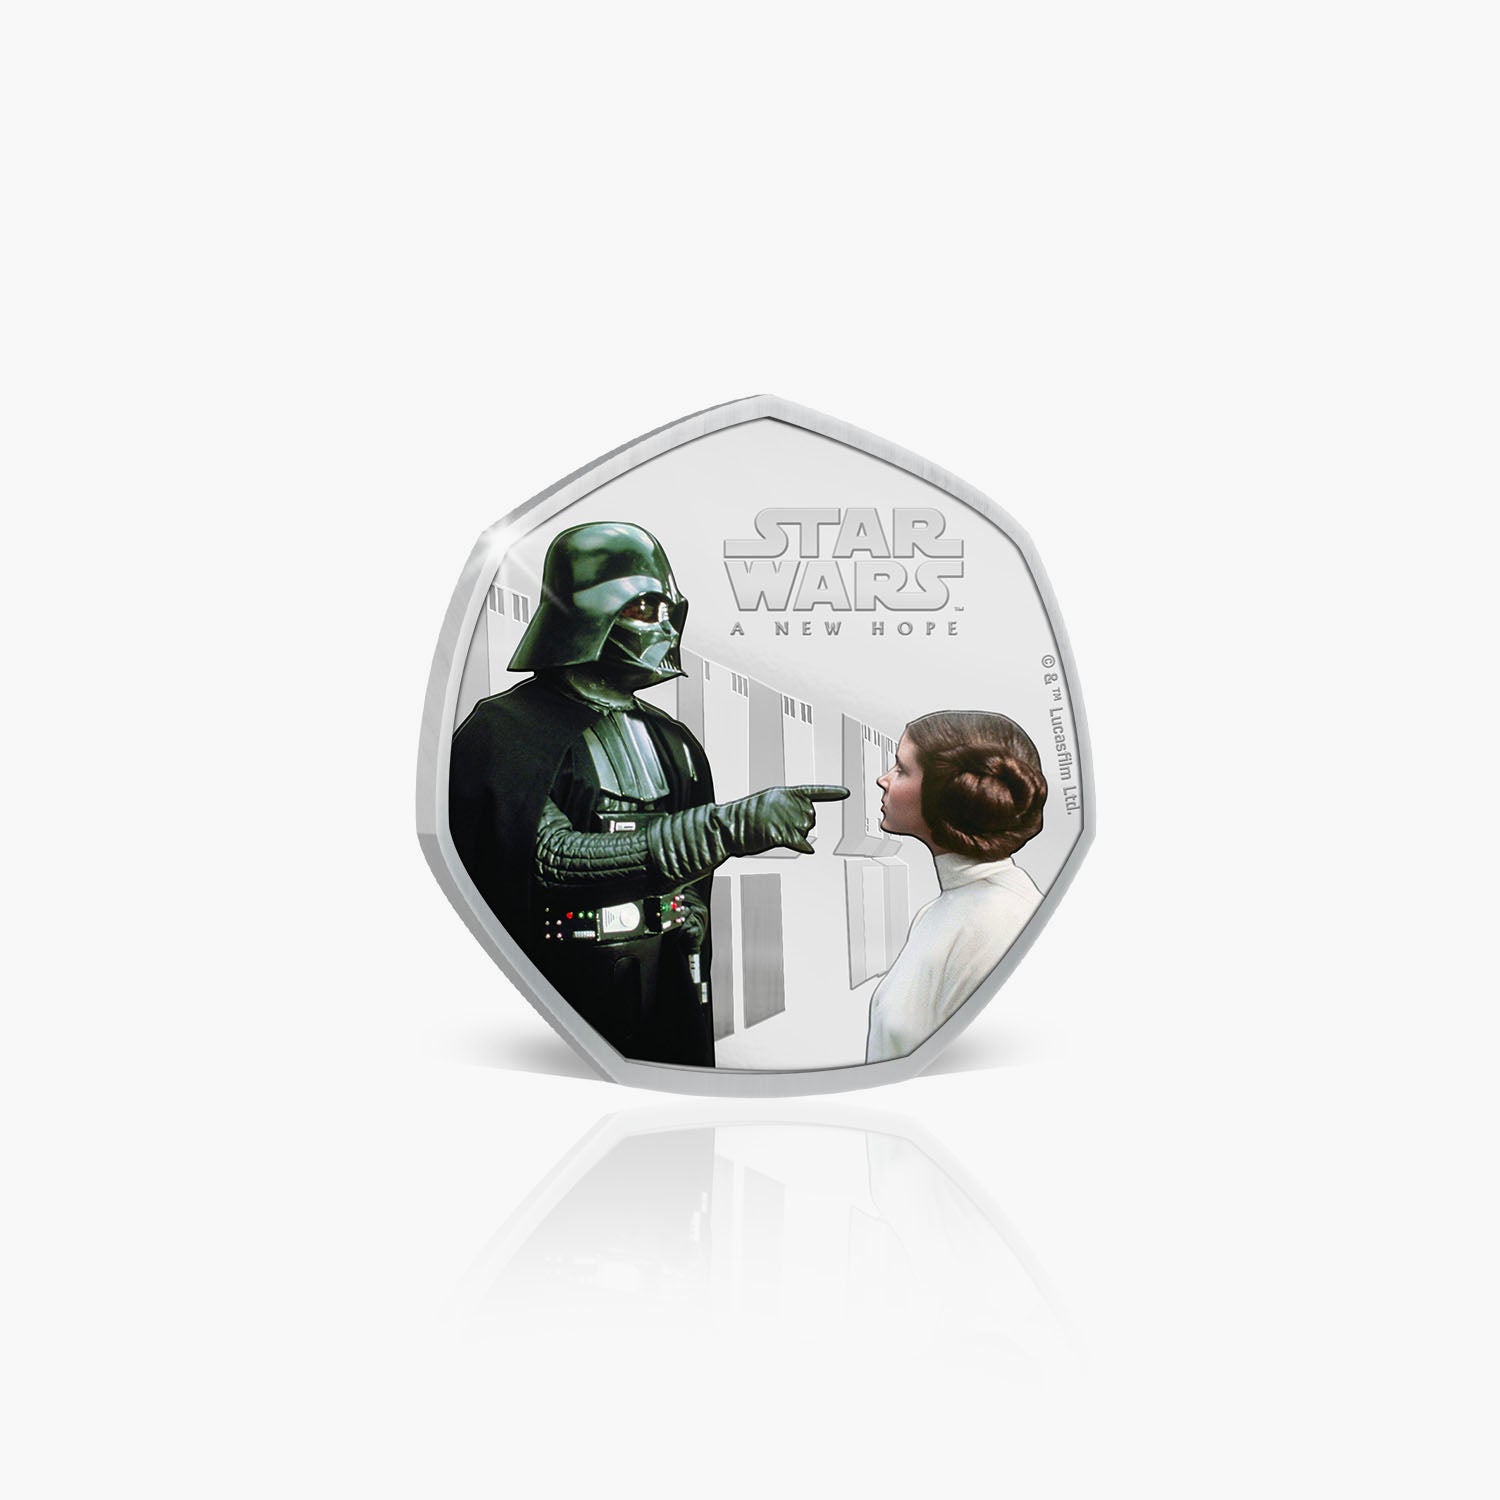 A New Hope - Diplomatic Mission Silver Plated Coin